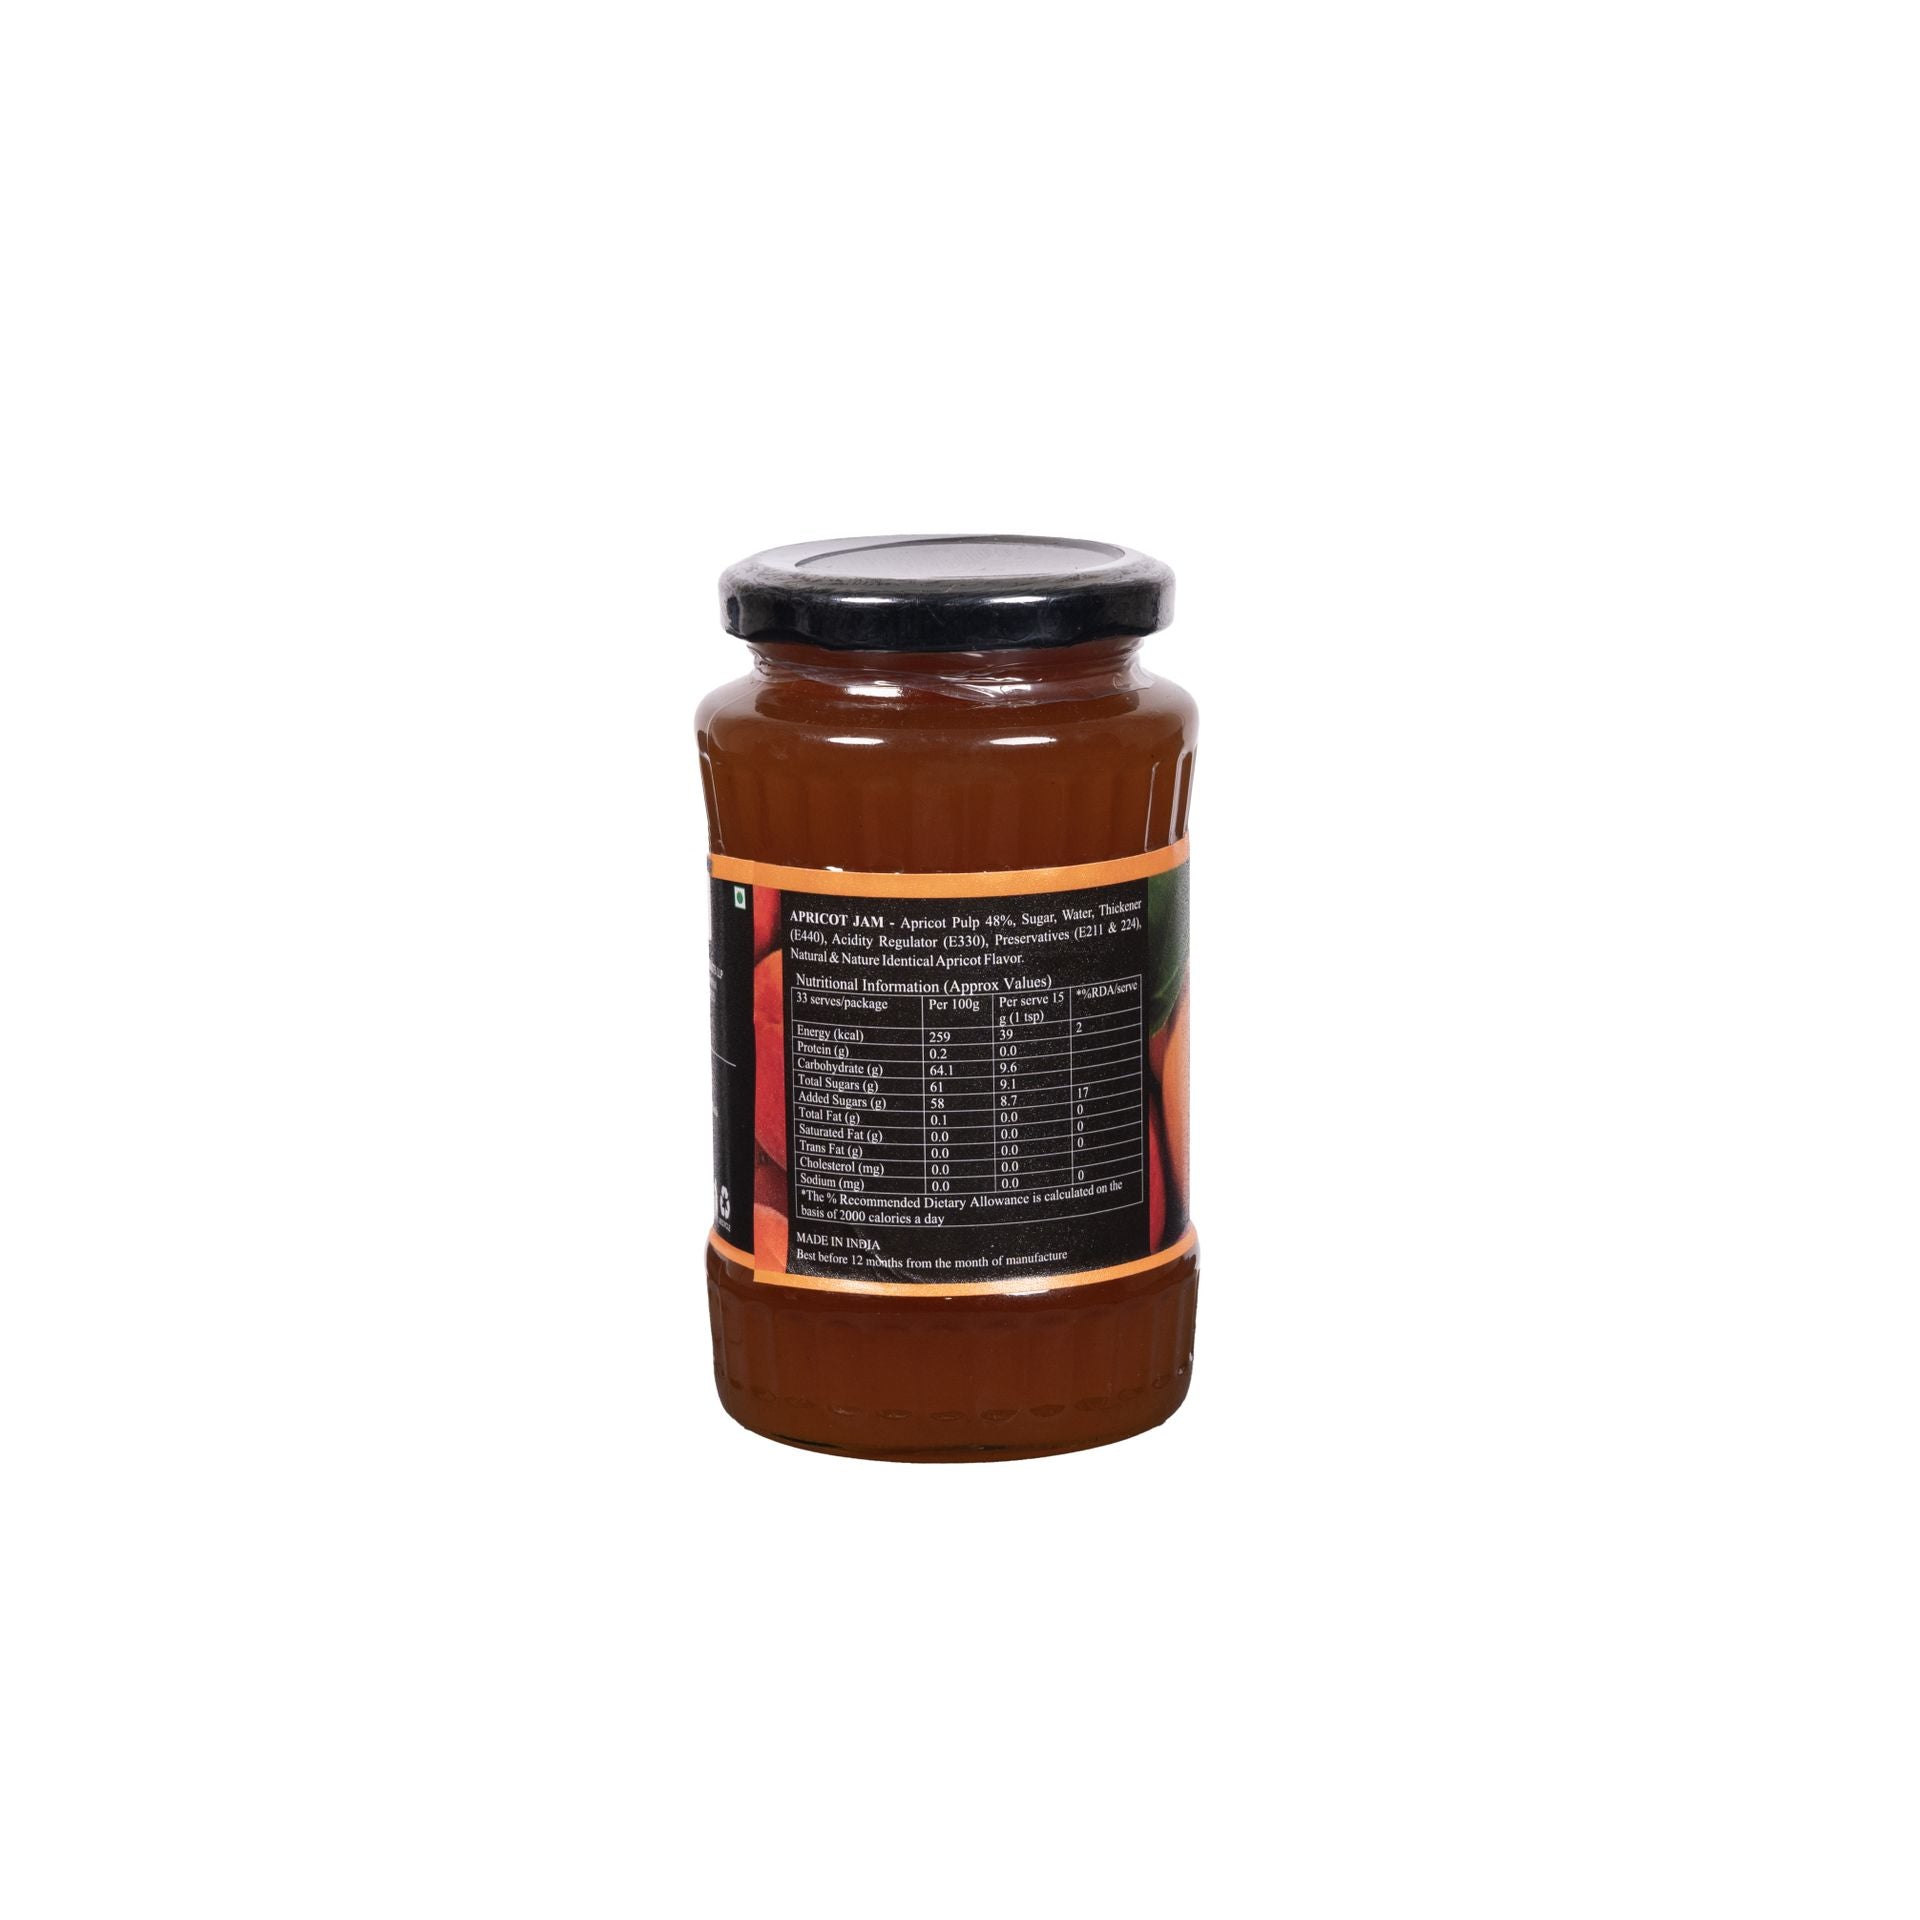 Heartyculture Apricot Jam 500 G